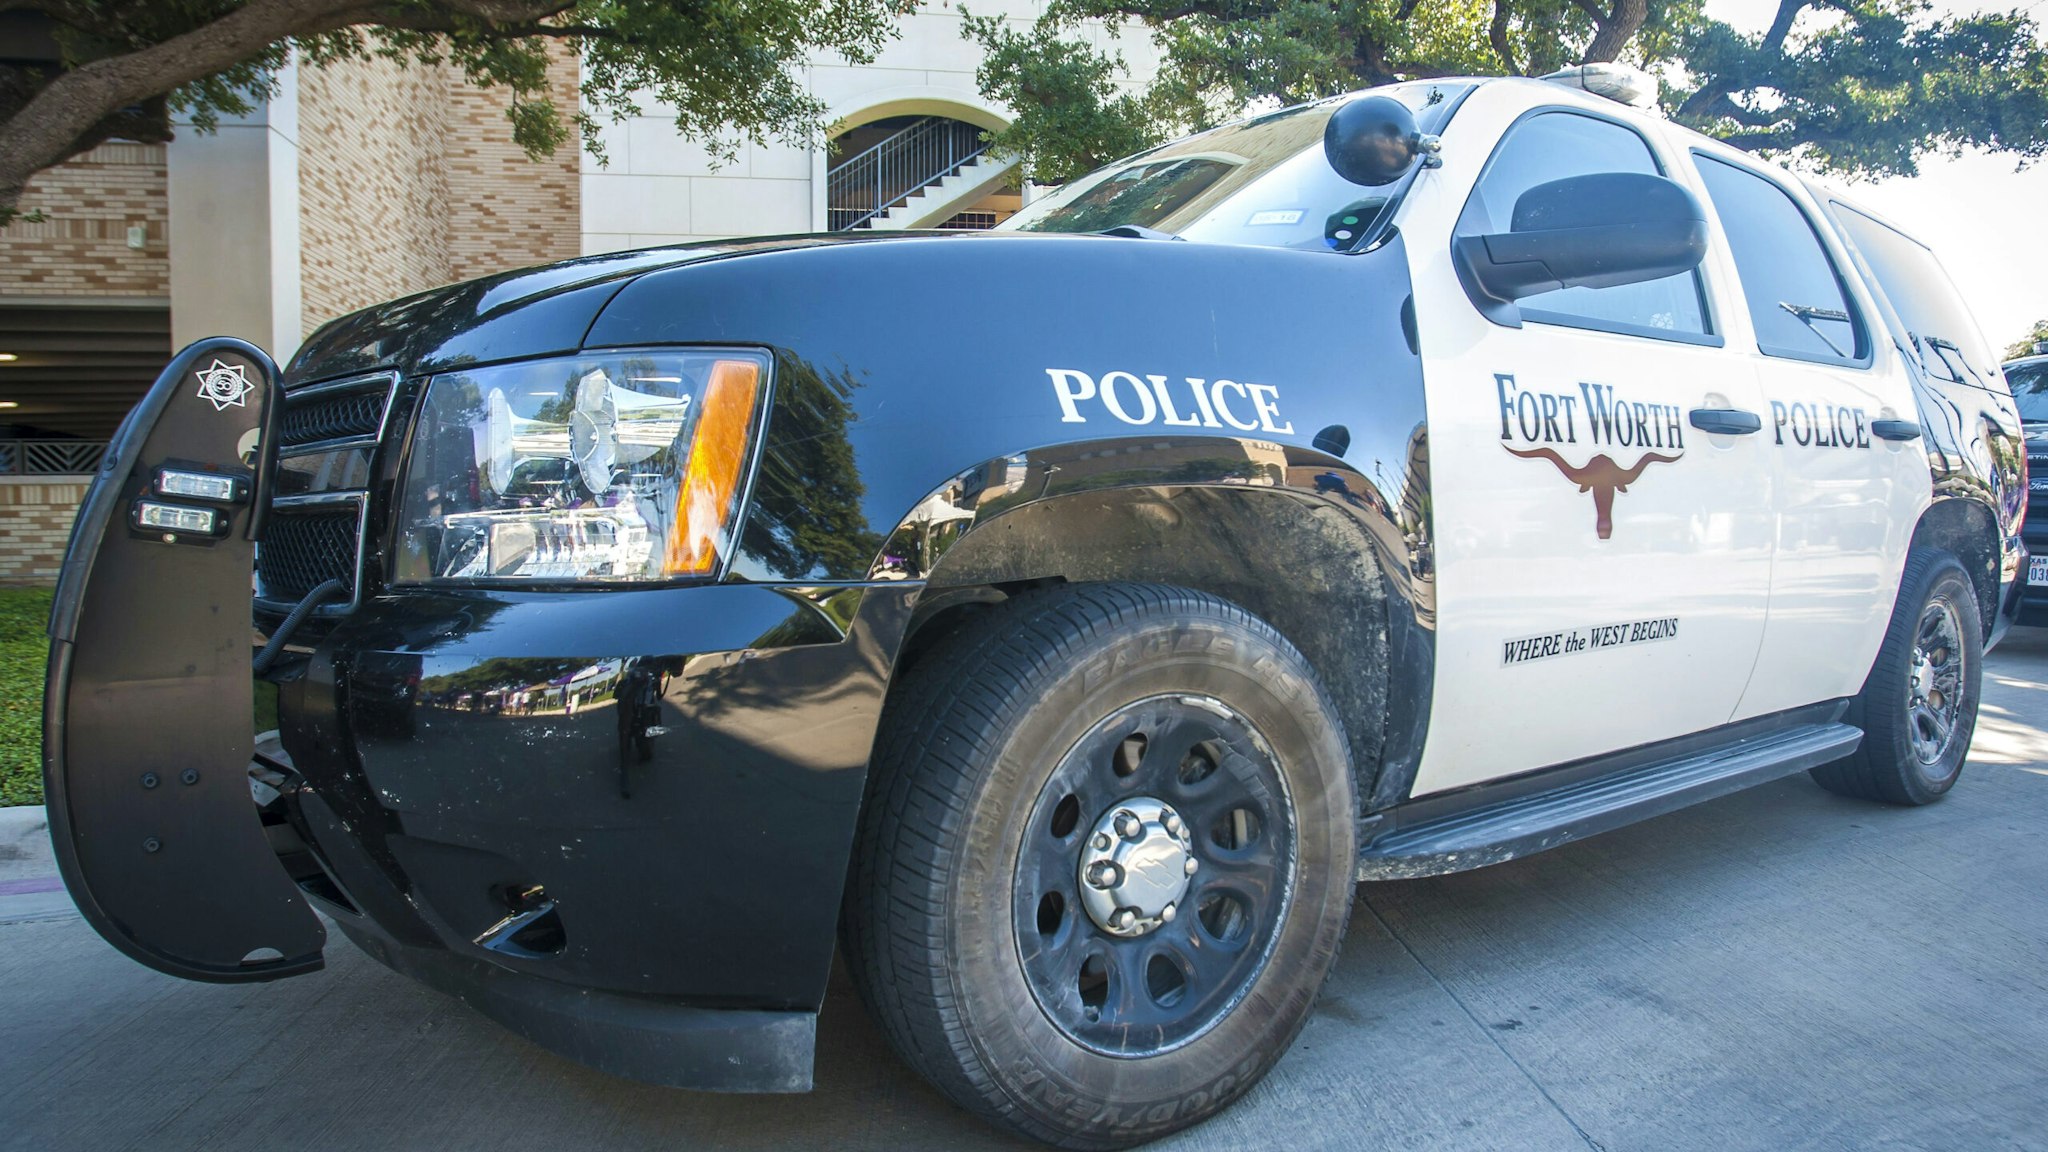 FORT WORTH, TX - SEPTEMBER 01: A Ft. Worth Police vehicle sits outside of the stadium before the game between the Southern Jaguars and the TCU Horned Frogs on Saturday September 1, 2018 at Amon G. Carter Stadium in Ft. Worth, TX.